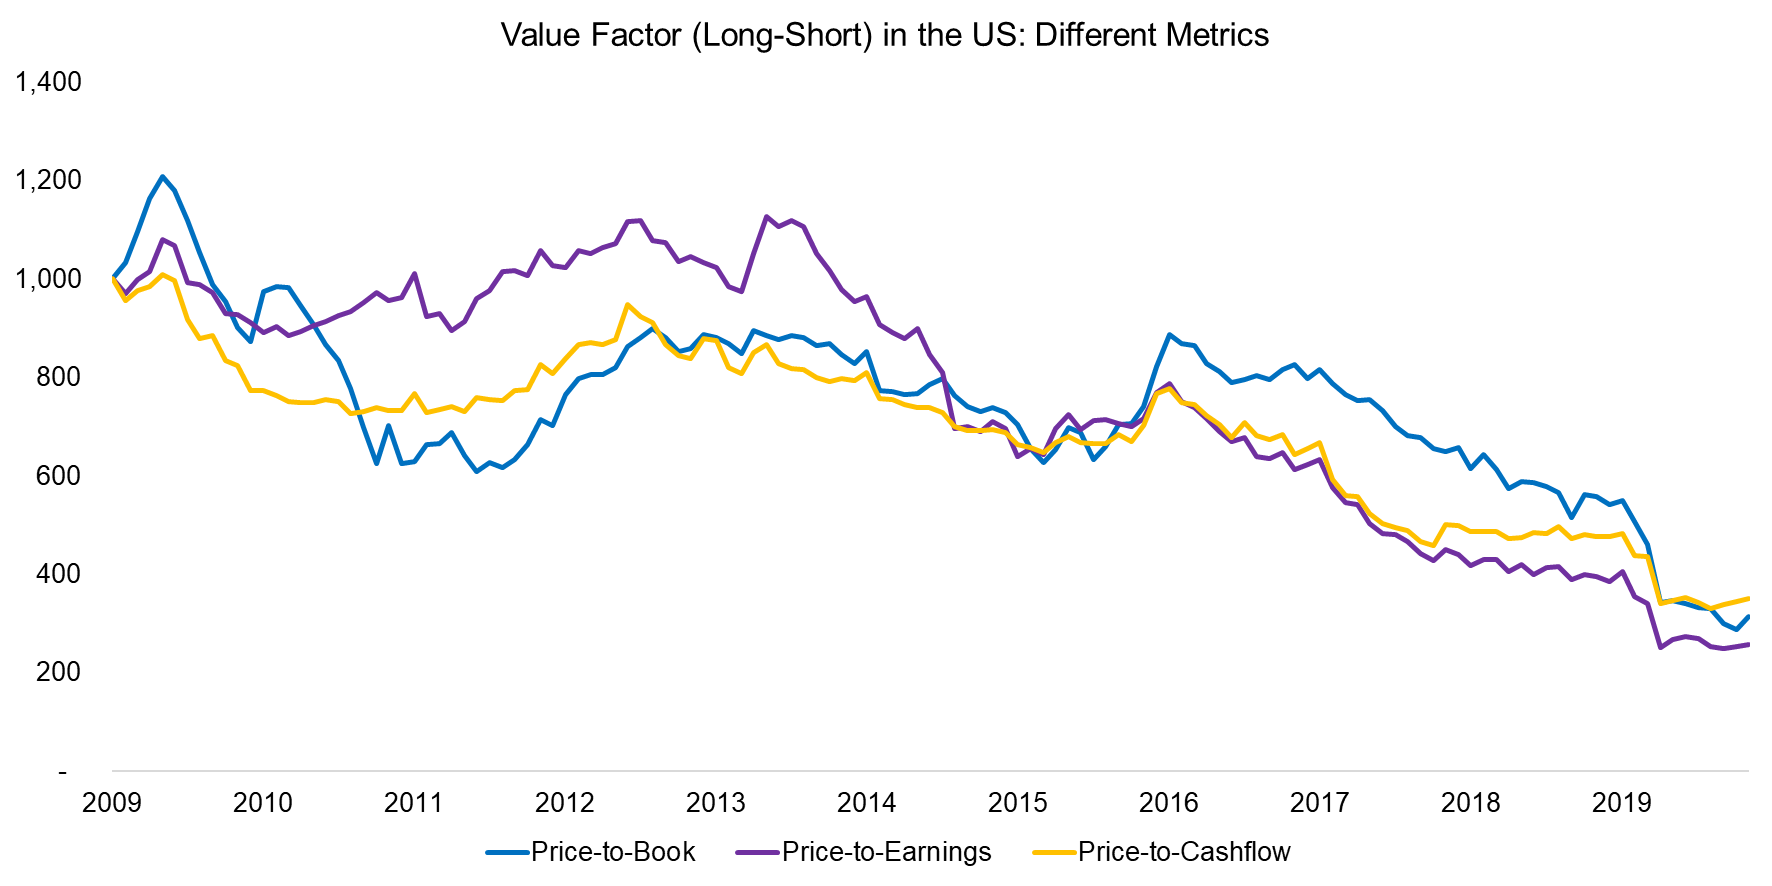 Value Factor (Long-Short) in the US Different Metrics